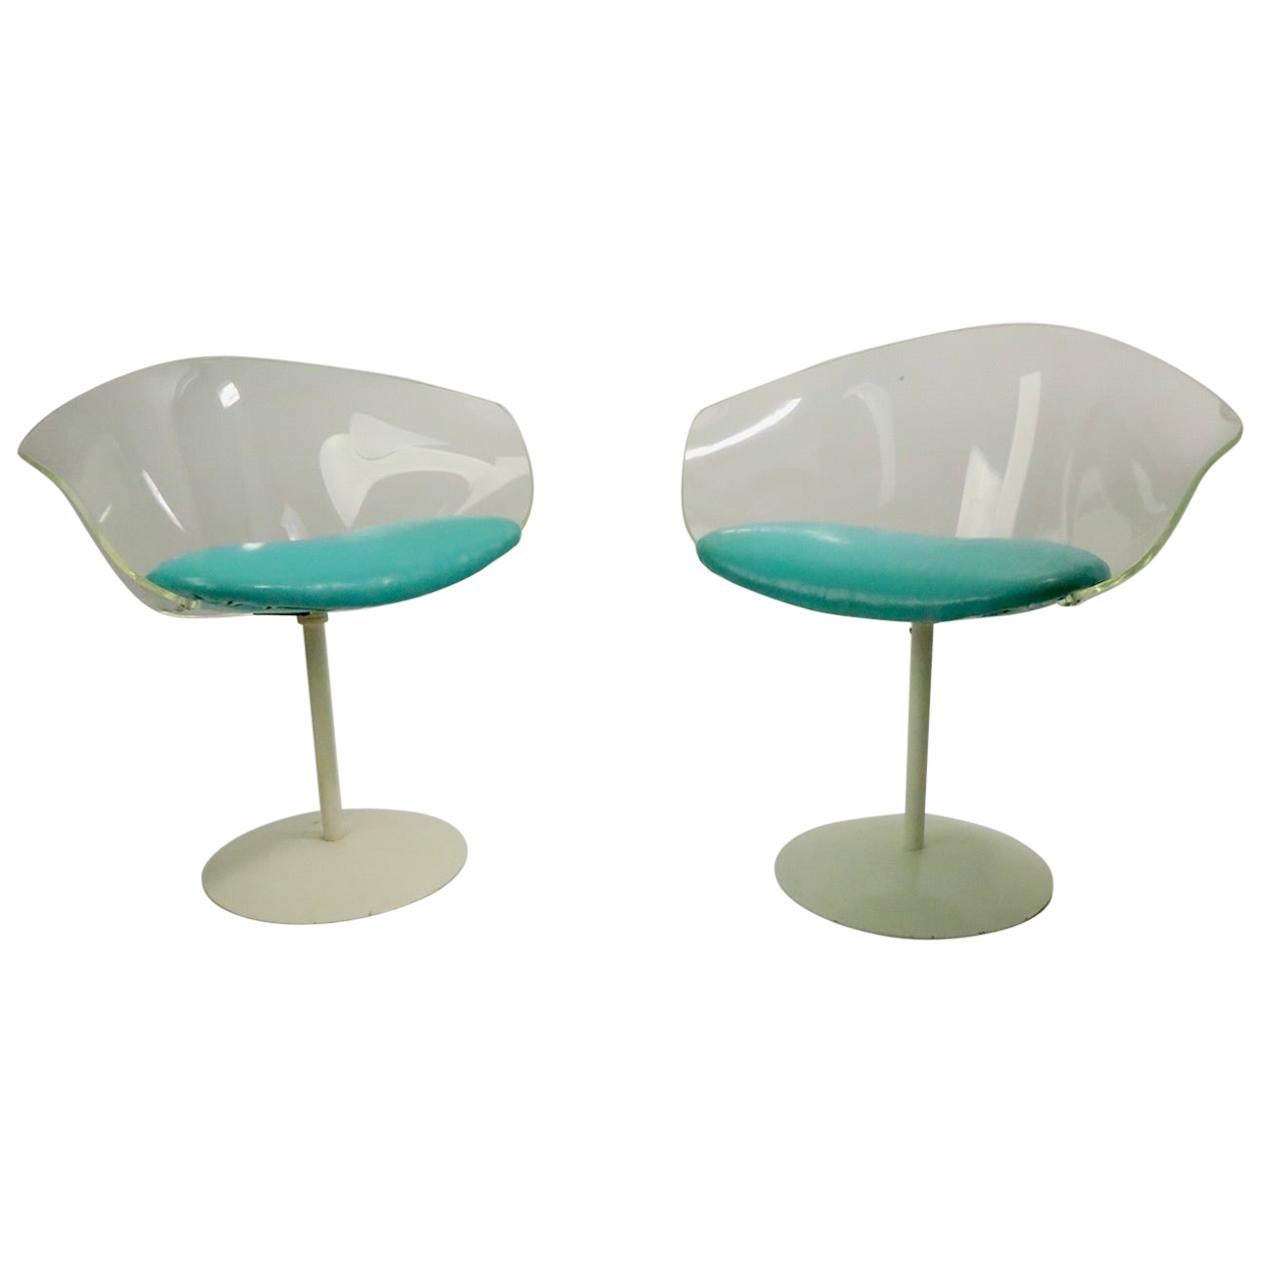 Pair of Lucite Shell Swivel Chairs